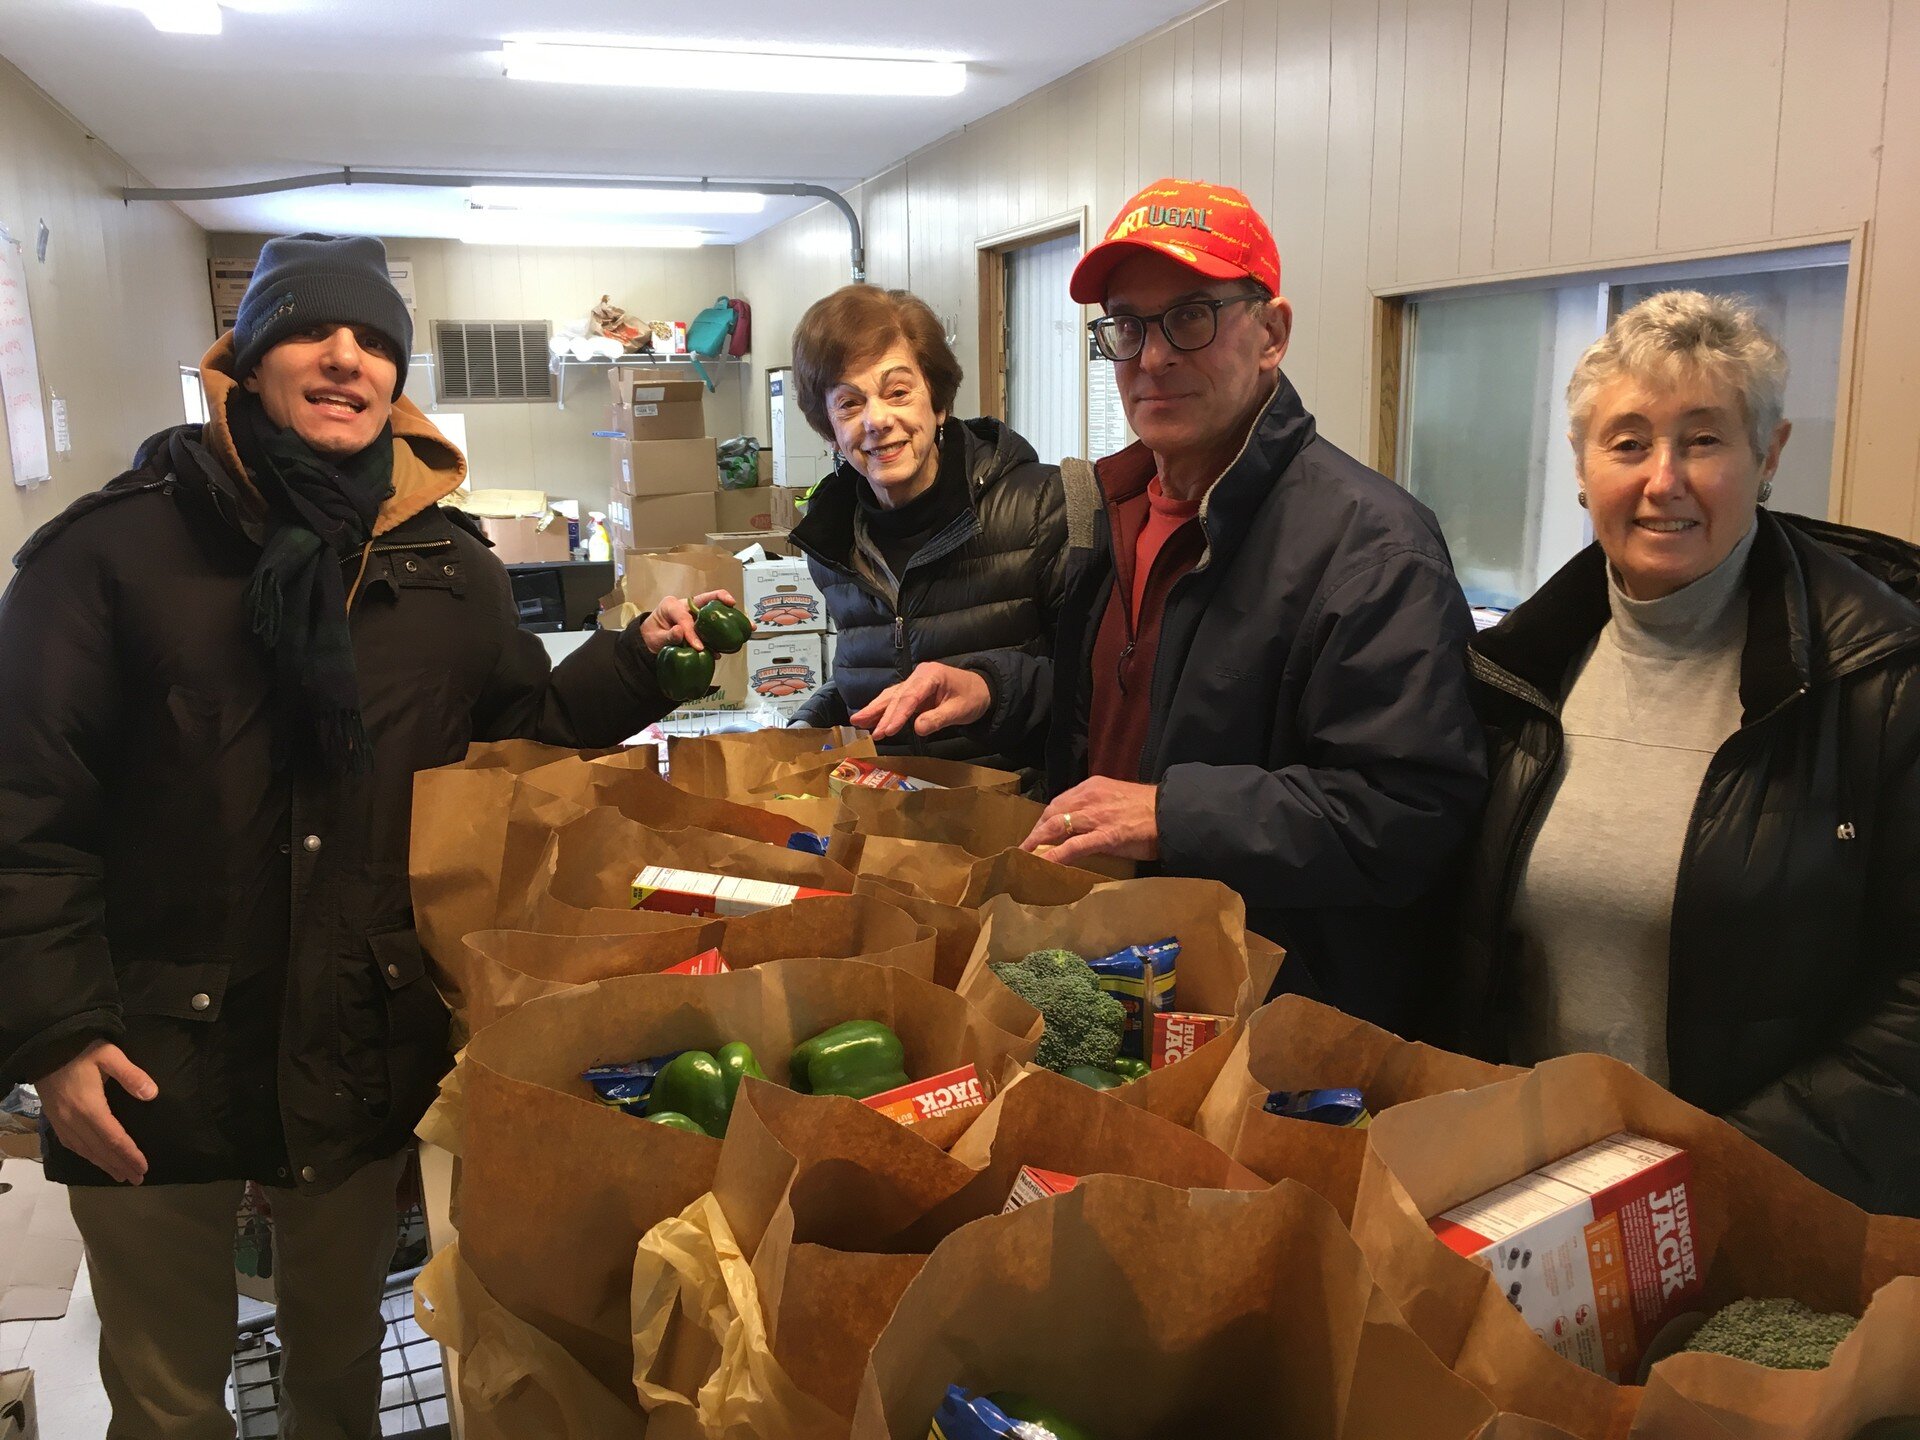 Thank you to the volunteers who helped pack 180 bags of fresh produce and other groceries at the @clekosherfp community experiencing food insecurity.